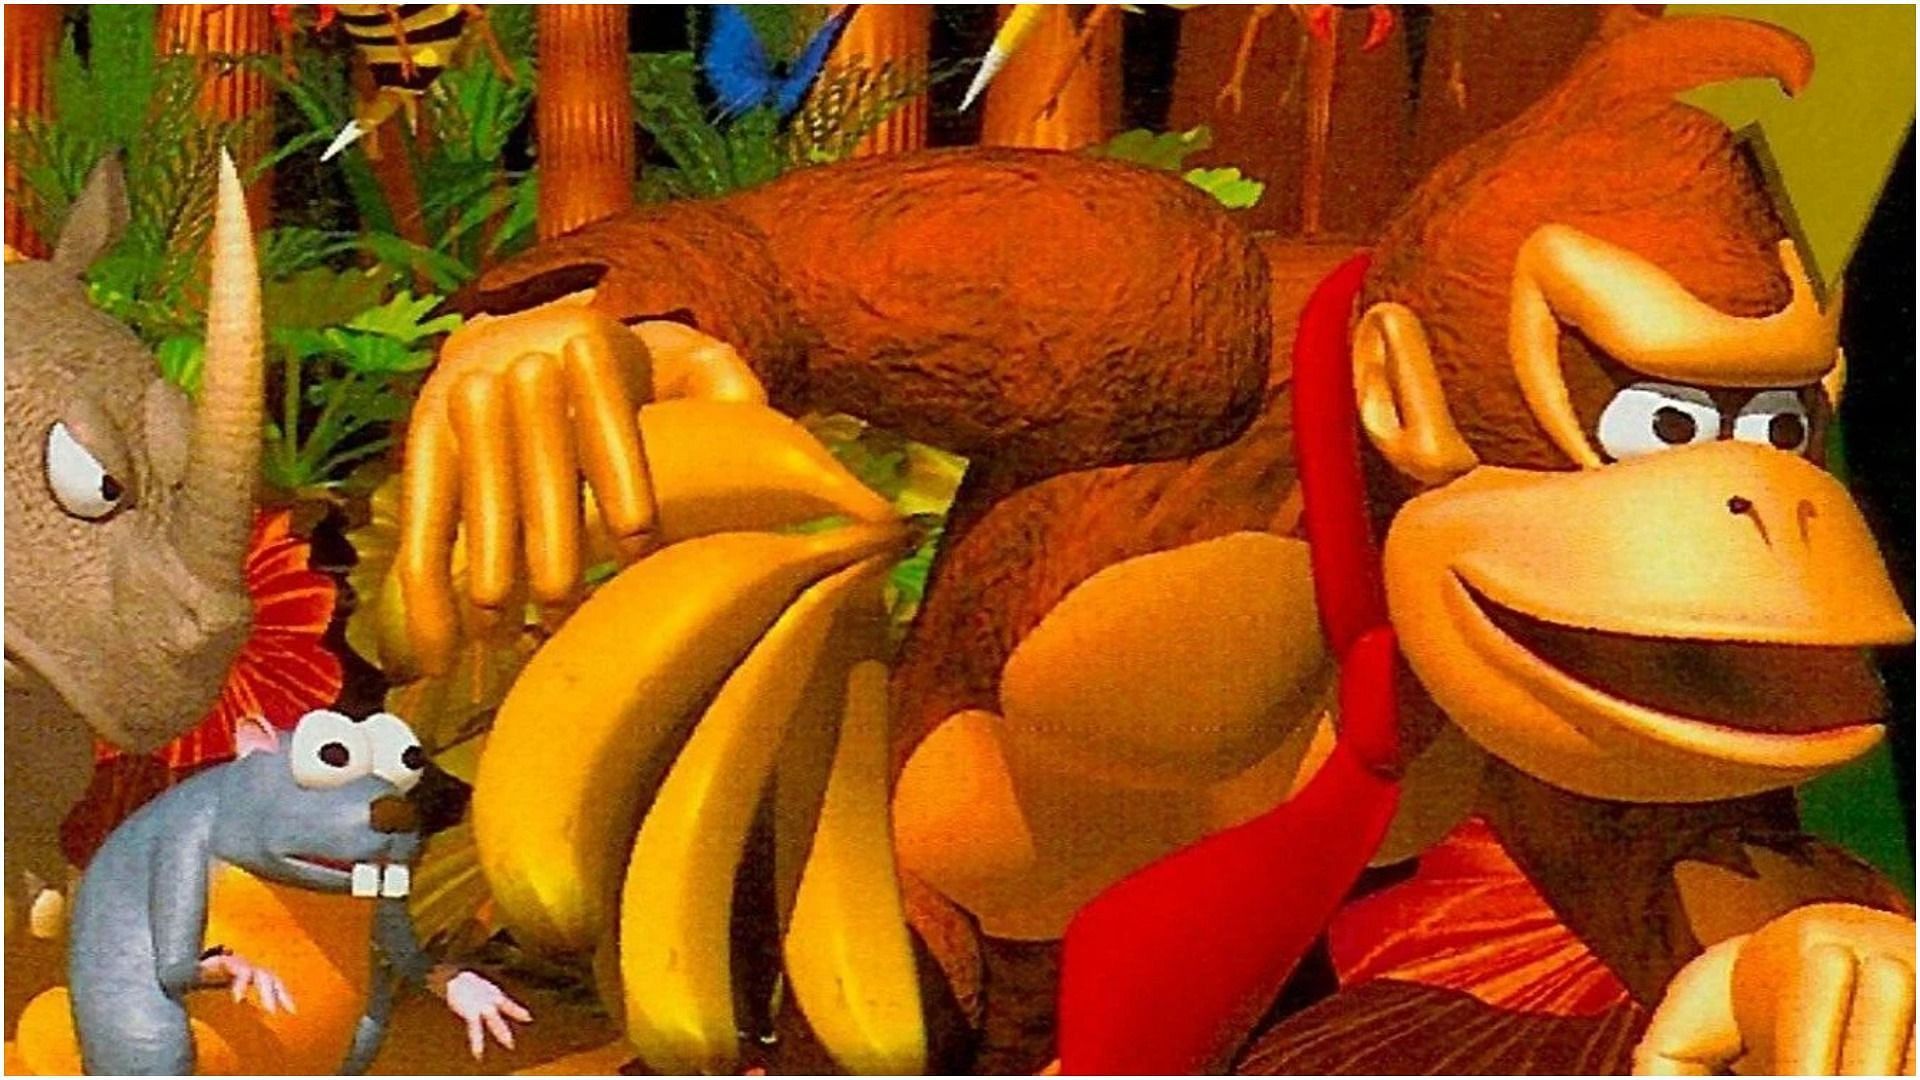 Donkey Kong and friends in Donkey Kong Country (Image via Nintendo)